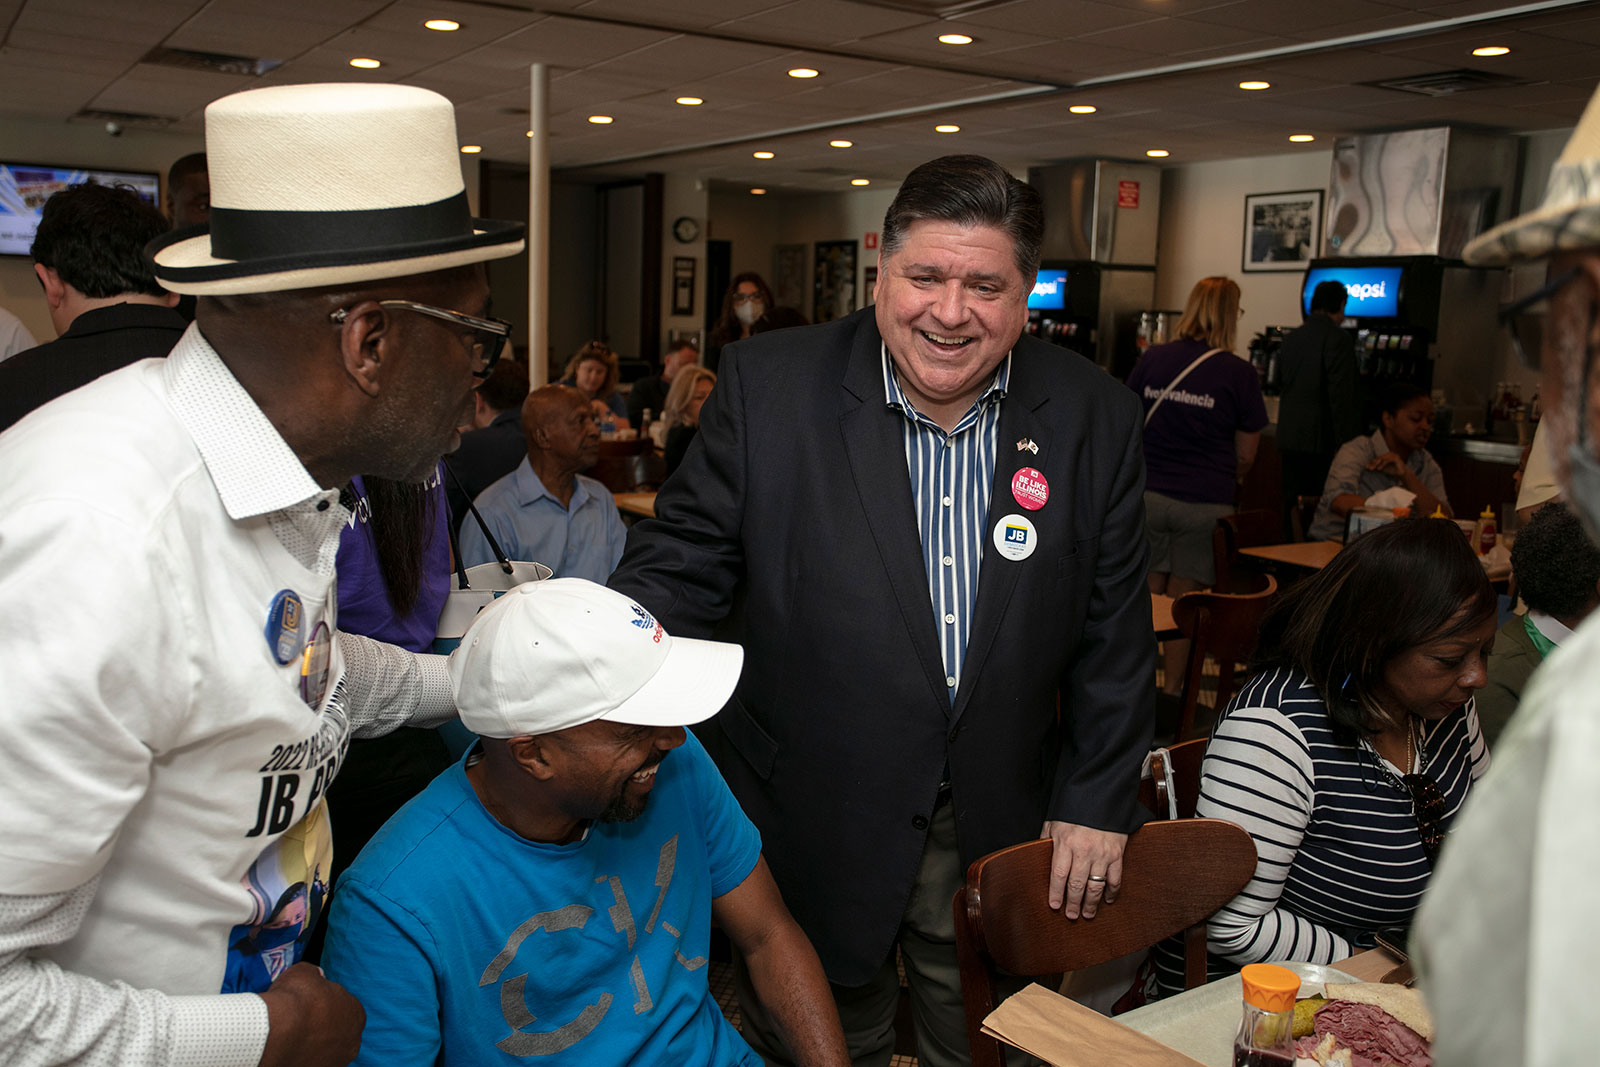 Illinois Gov. JB Pritzker speaks to supporters on primary election day at Manny's Deli on June 28 in Chicago.